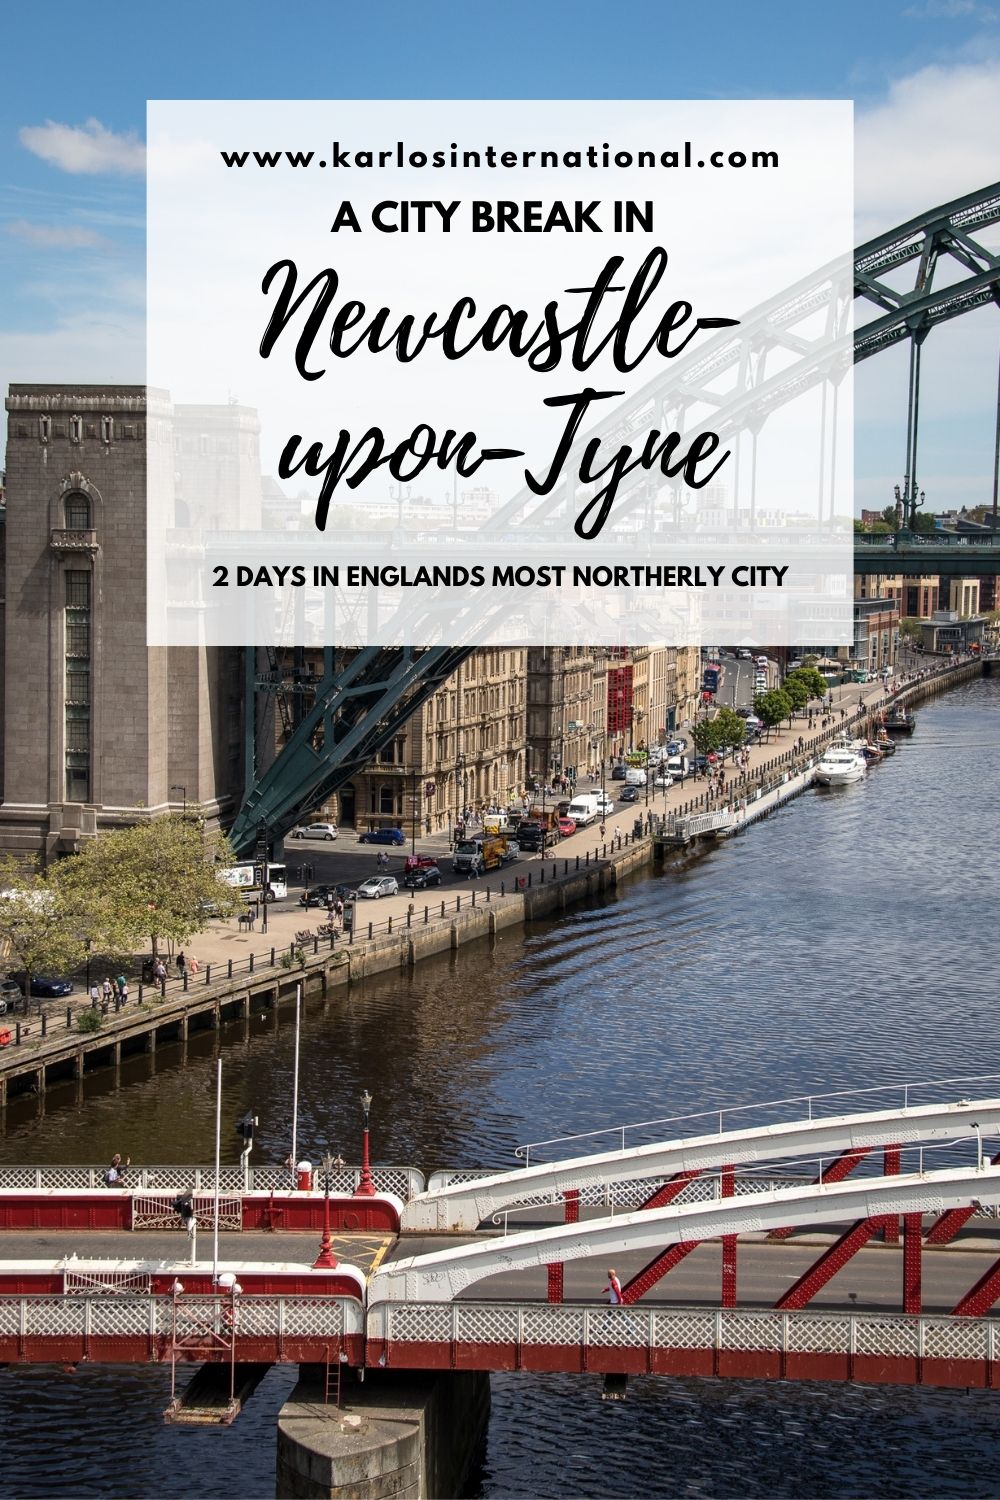 A Newcastle City Break - An Itinerary for 2 days in Newcastle. 